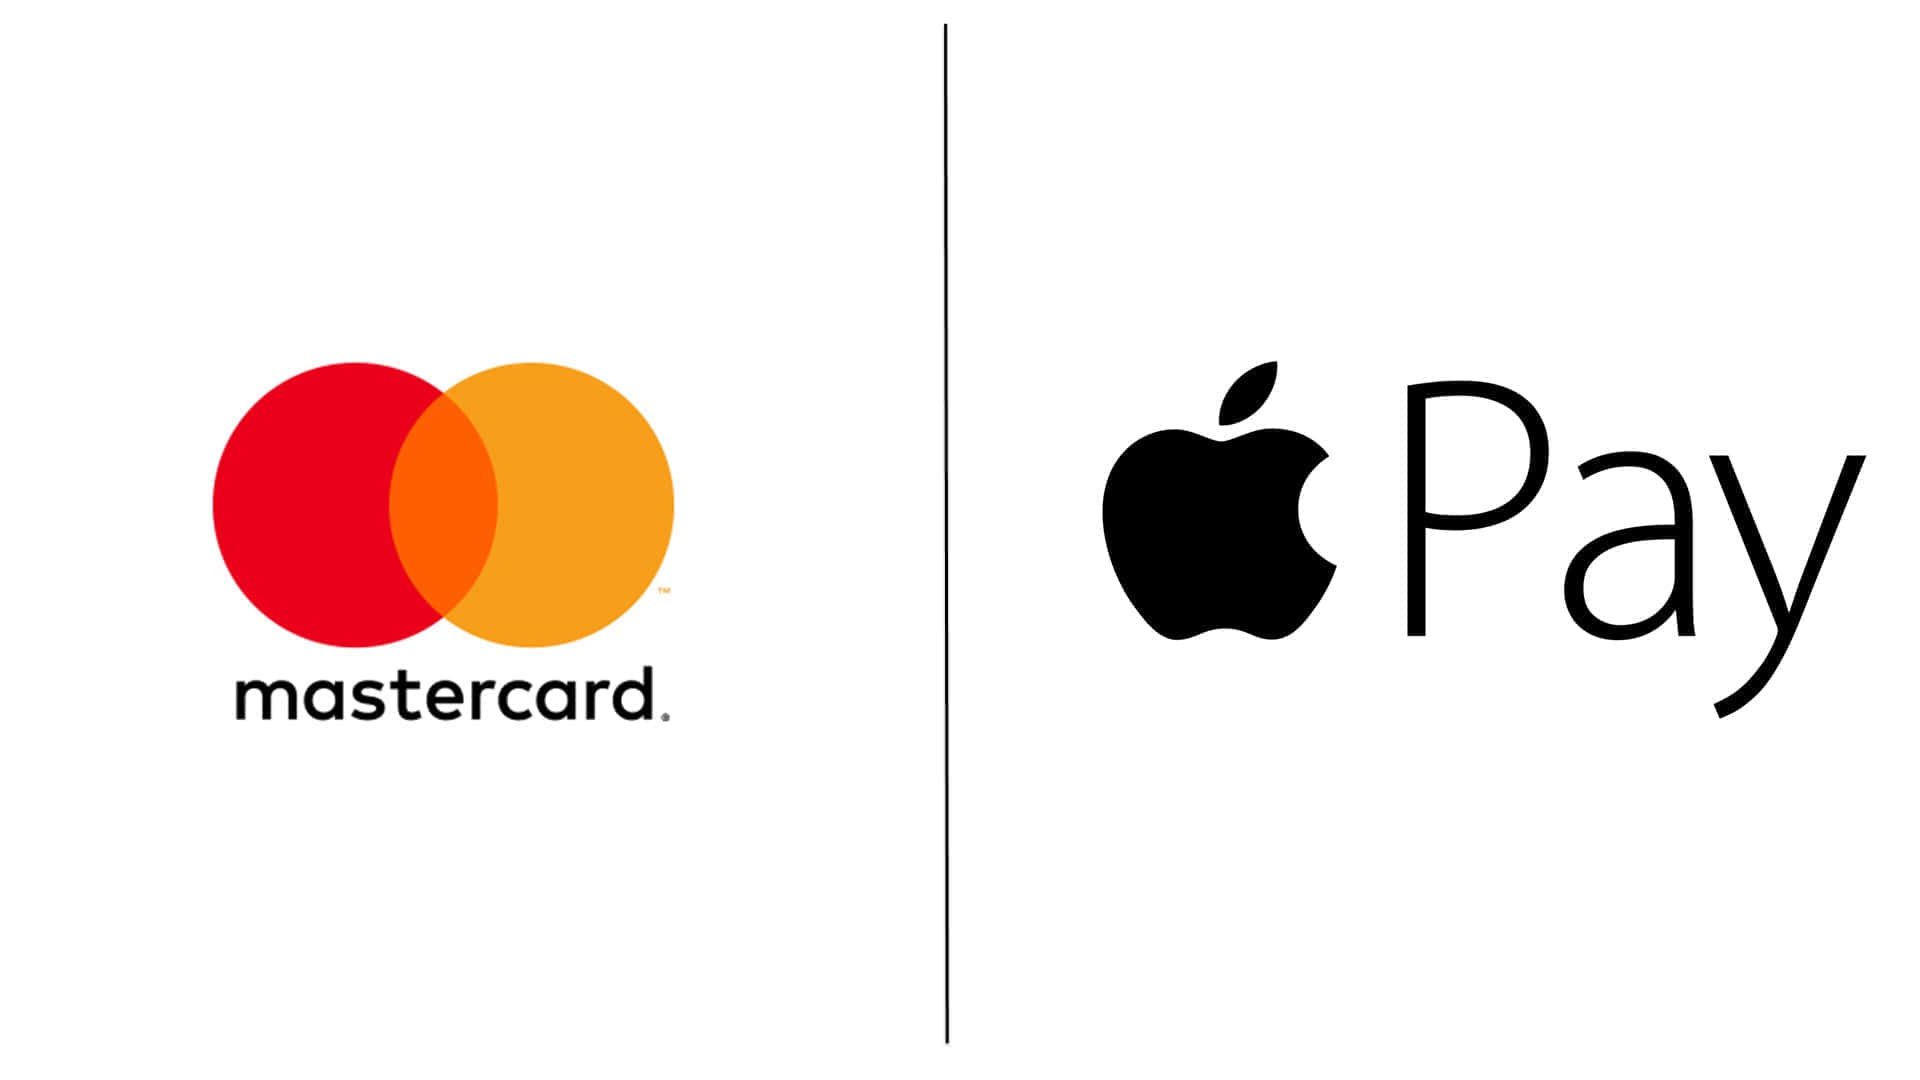 Make payments quickly and securely with Apple Pay